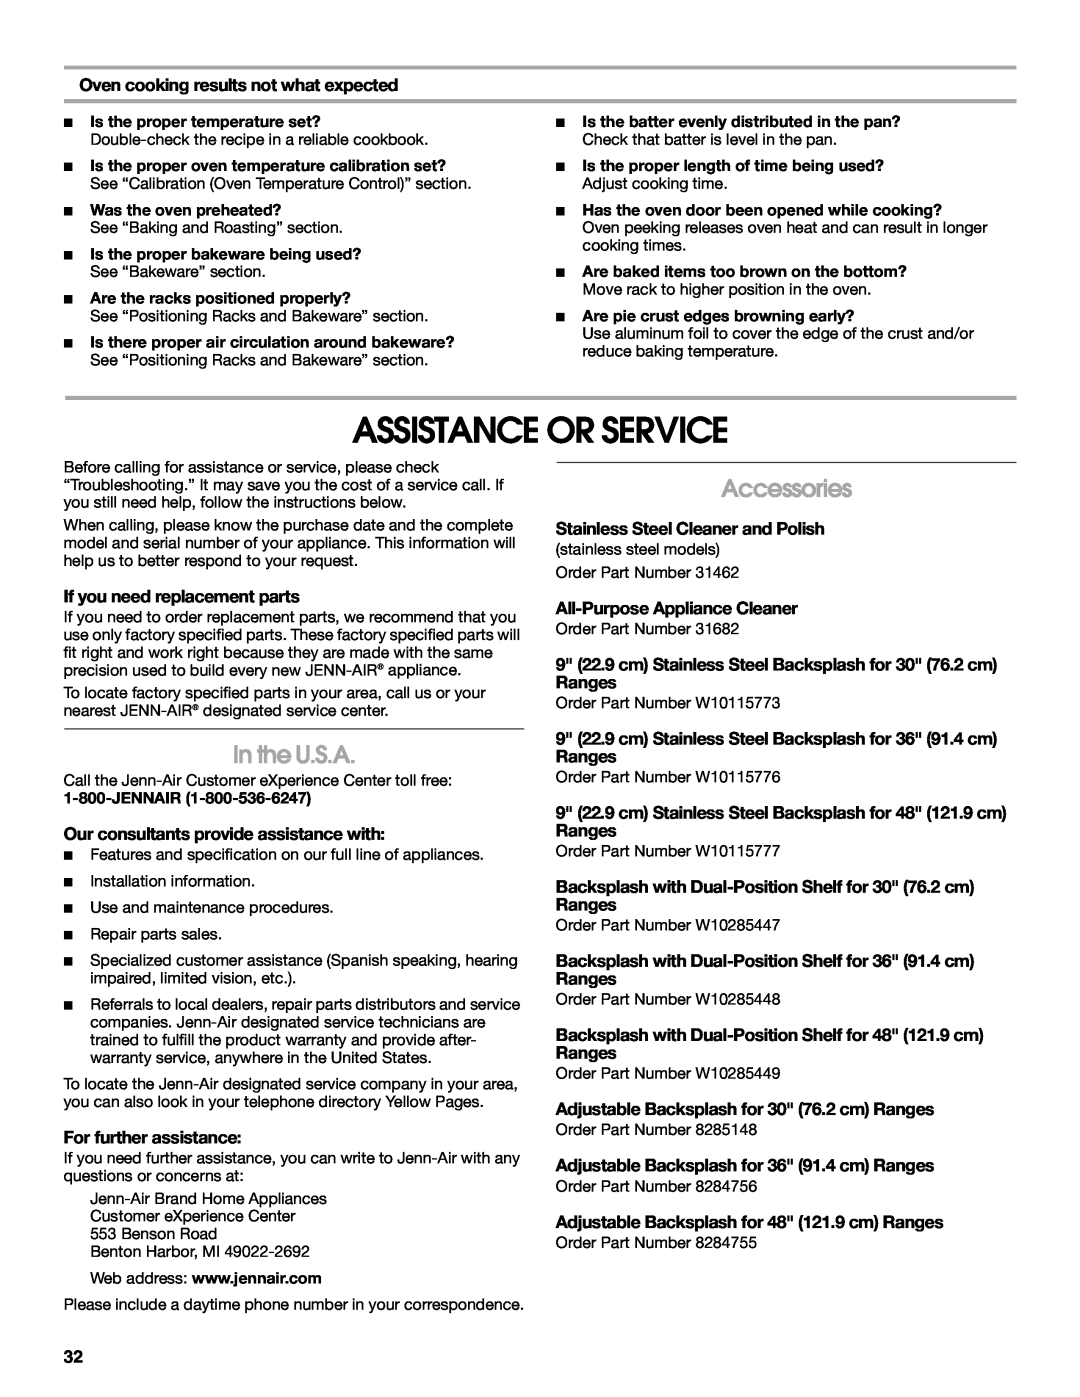 Jenn-Air JDRP430 manual Assistance Or Service, In the U.S.A, Accessories, Oven cooking results not what expected 